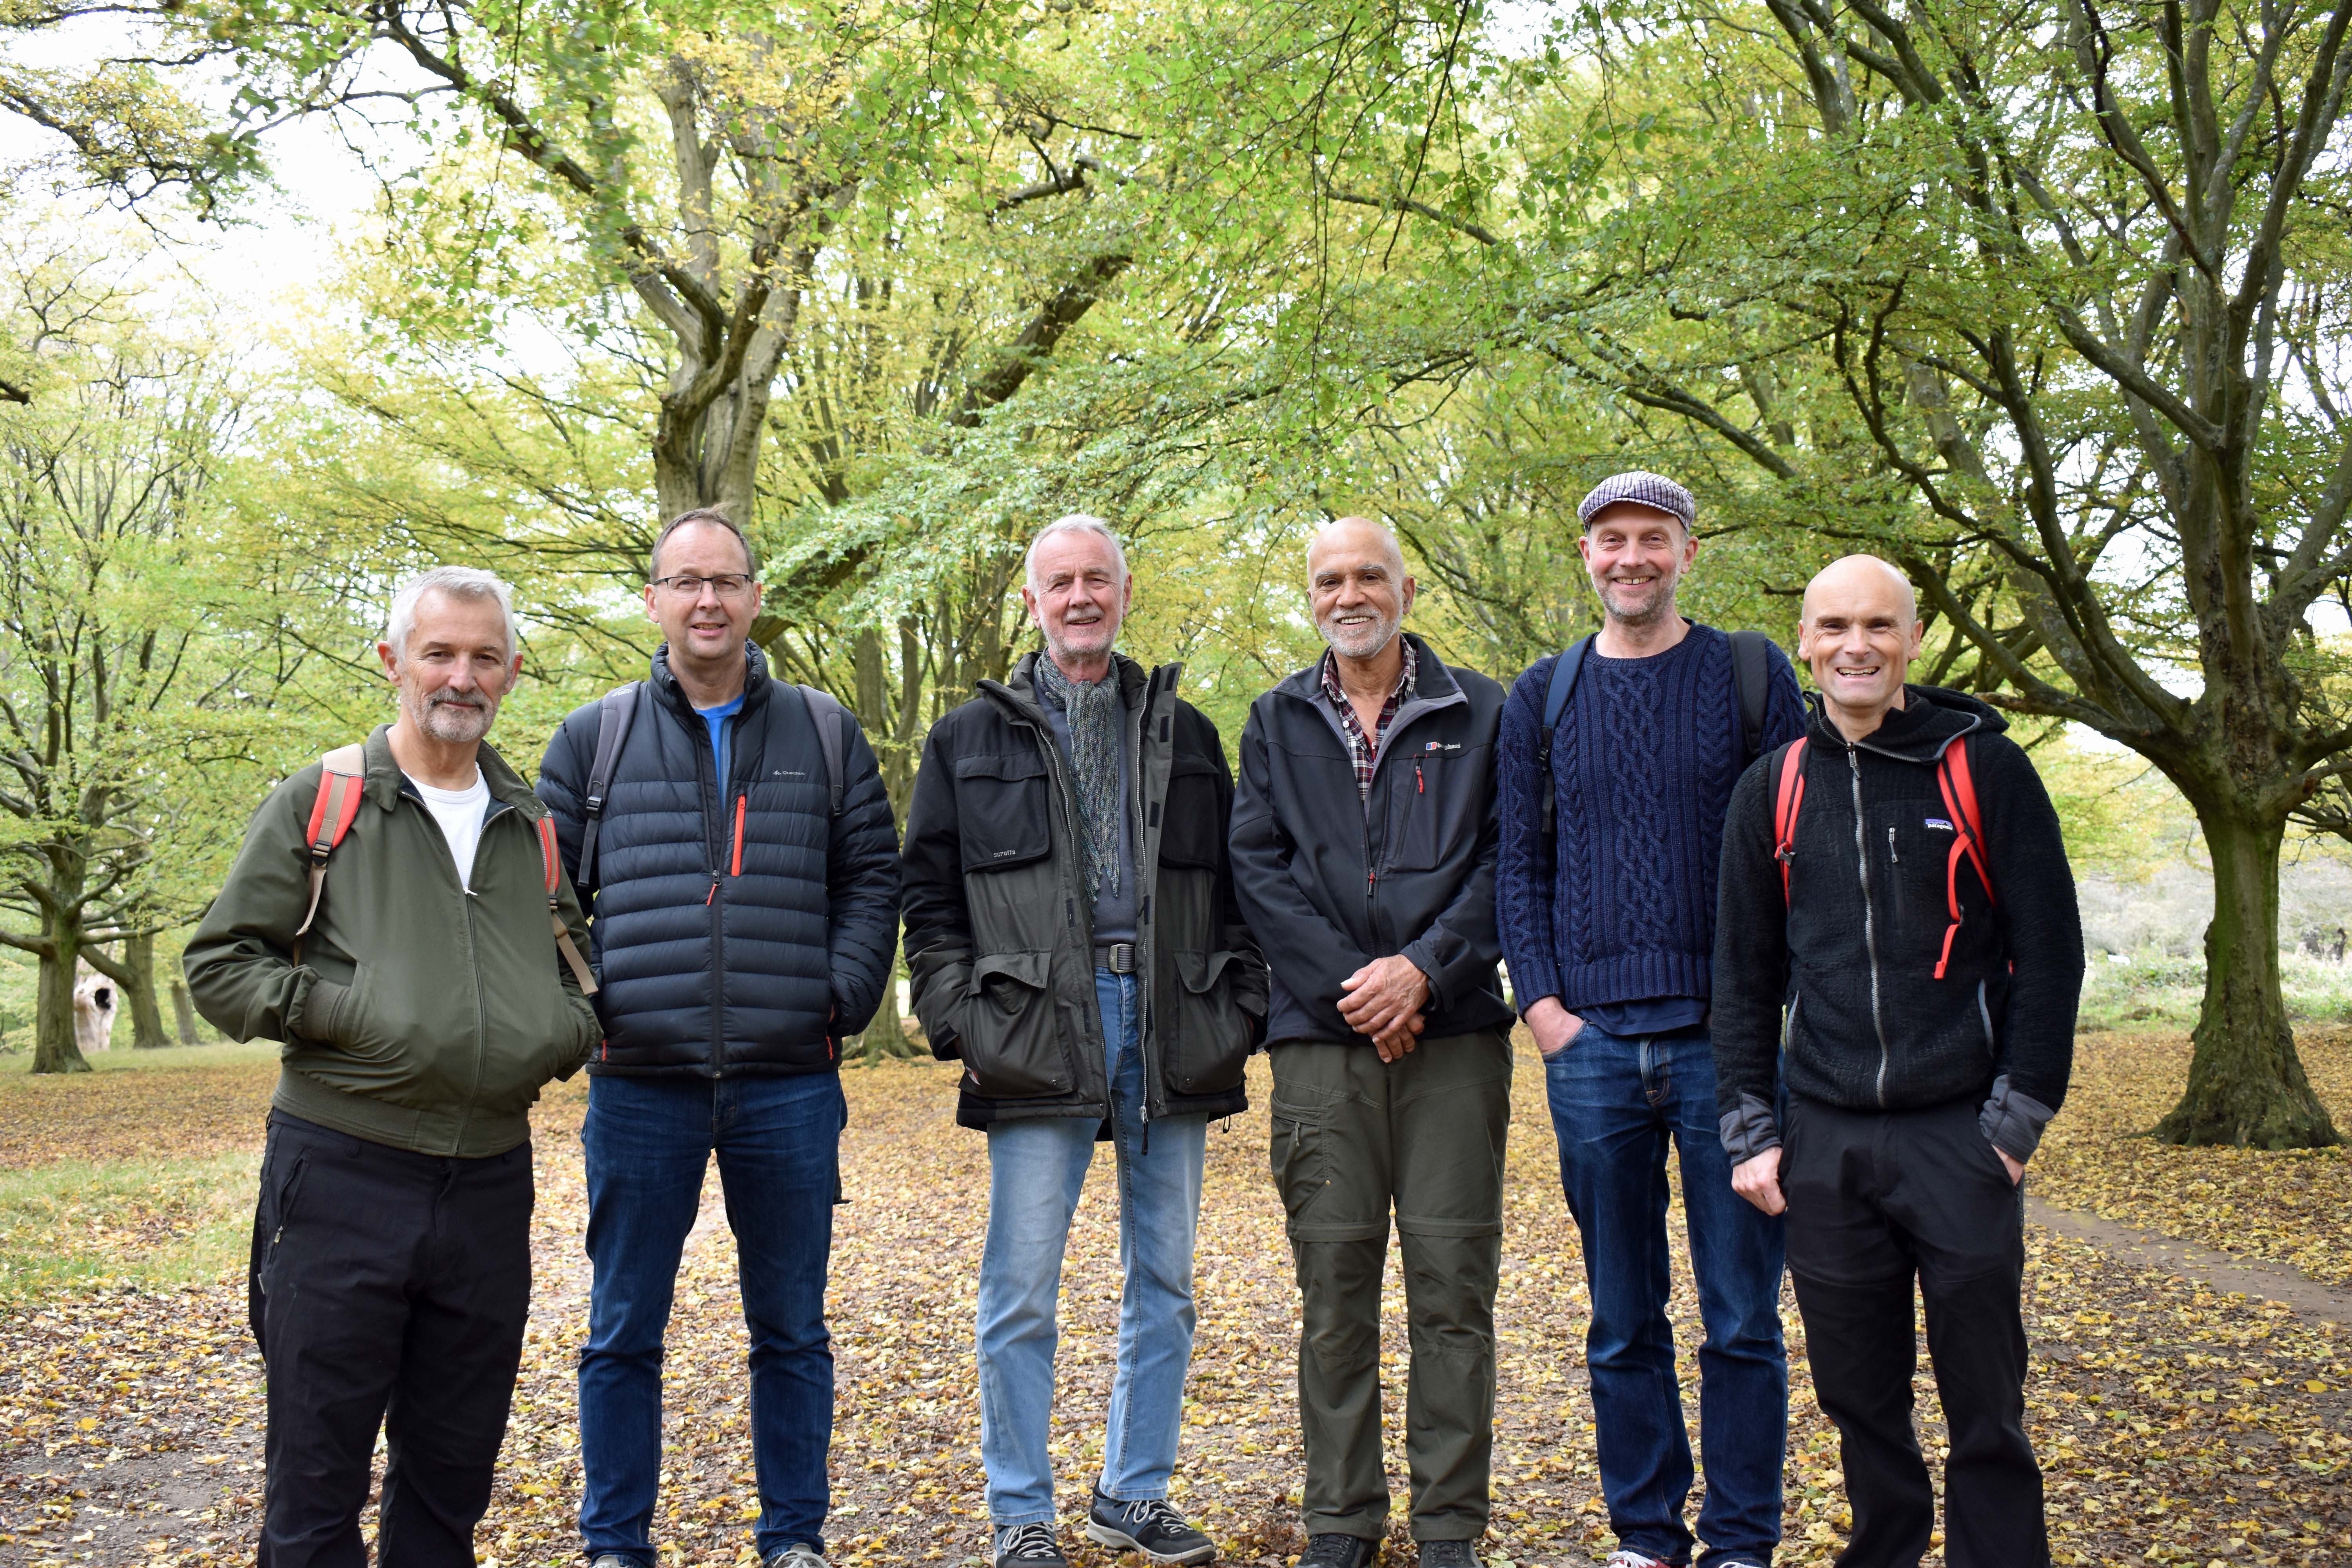 Mike Luetchford with some of his Dharma heirs walking in Richmond Park in November 2021